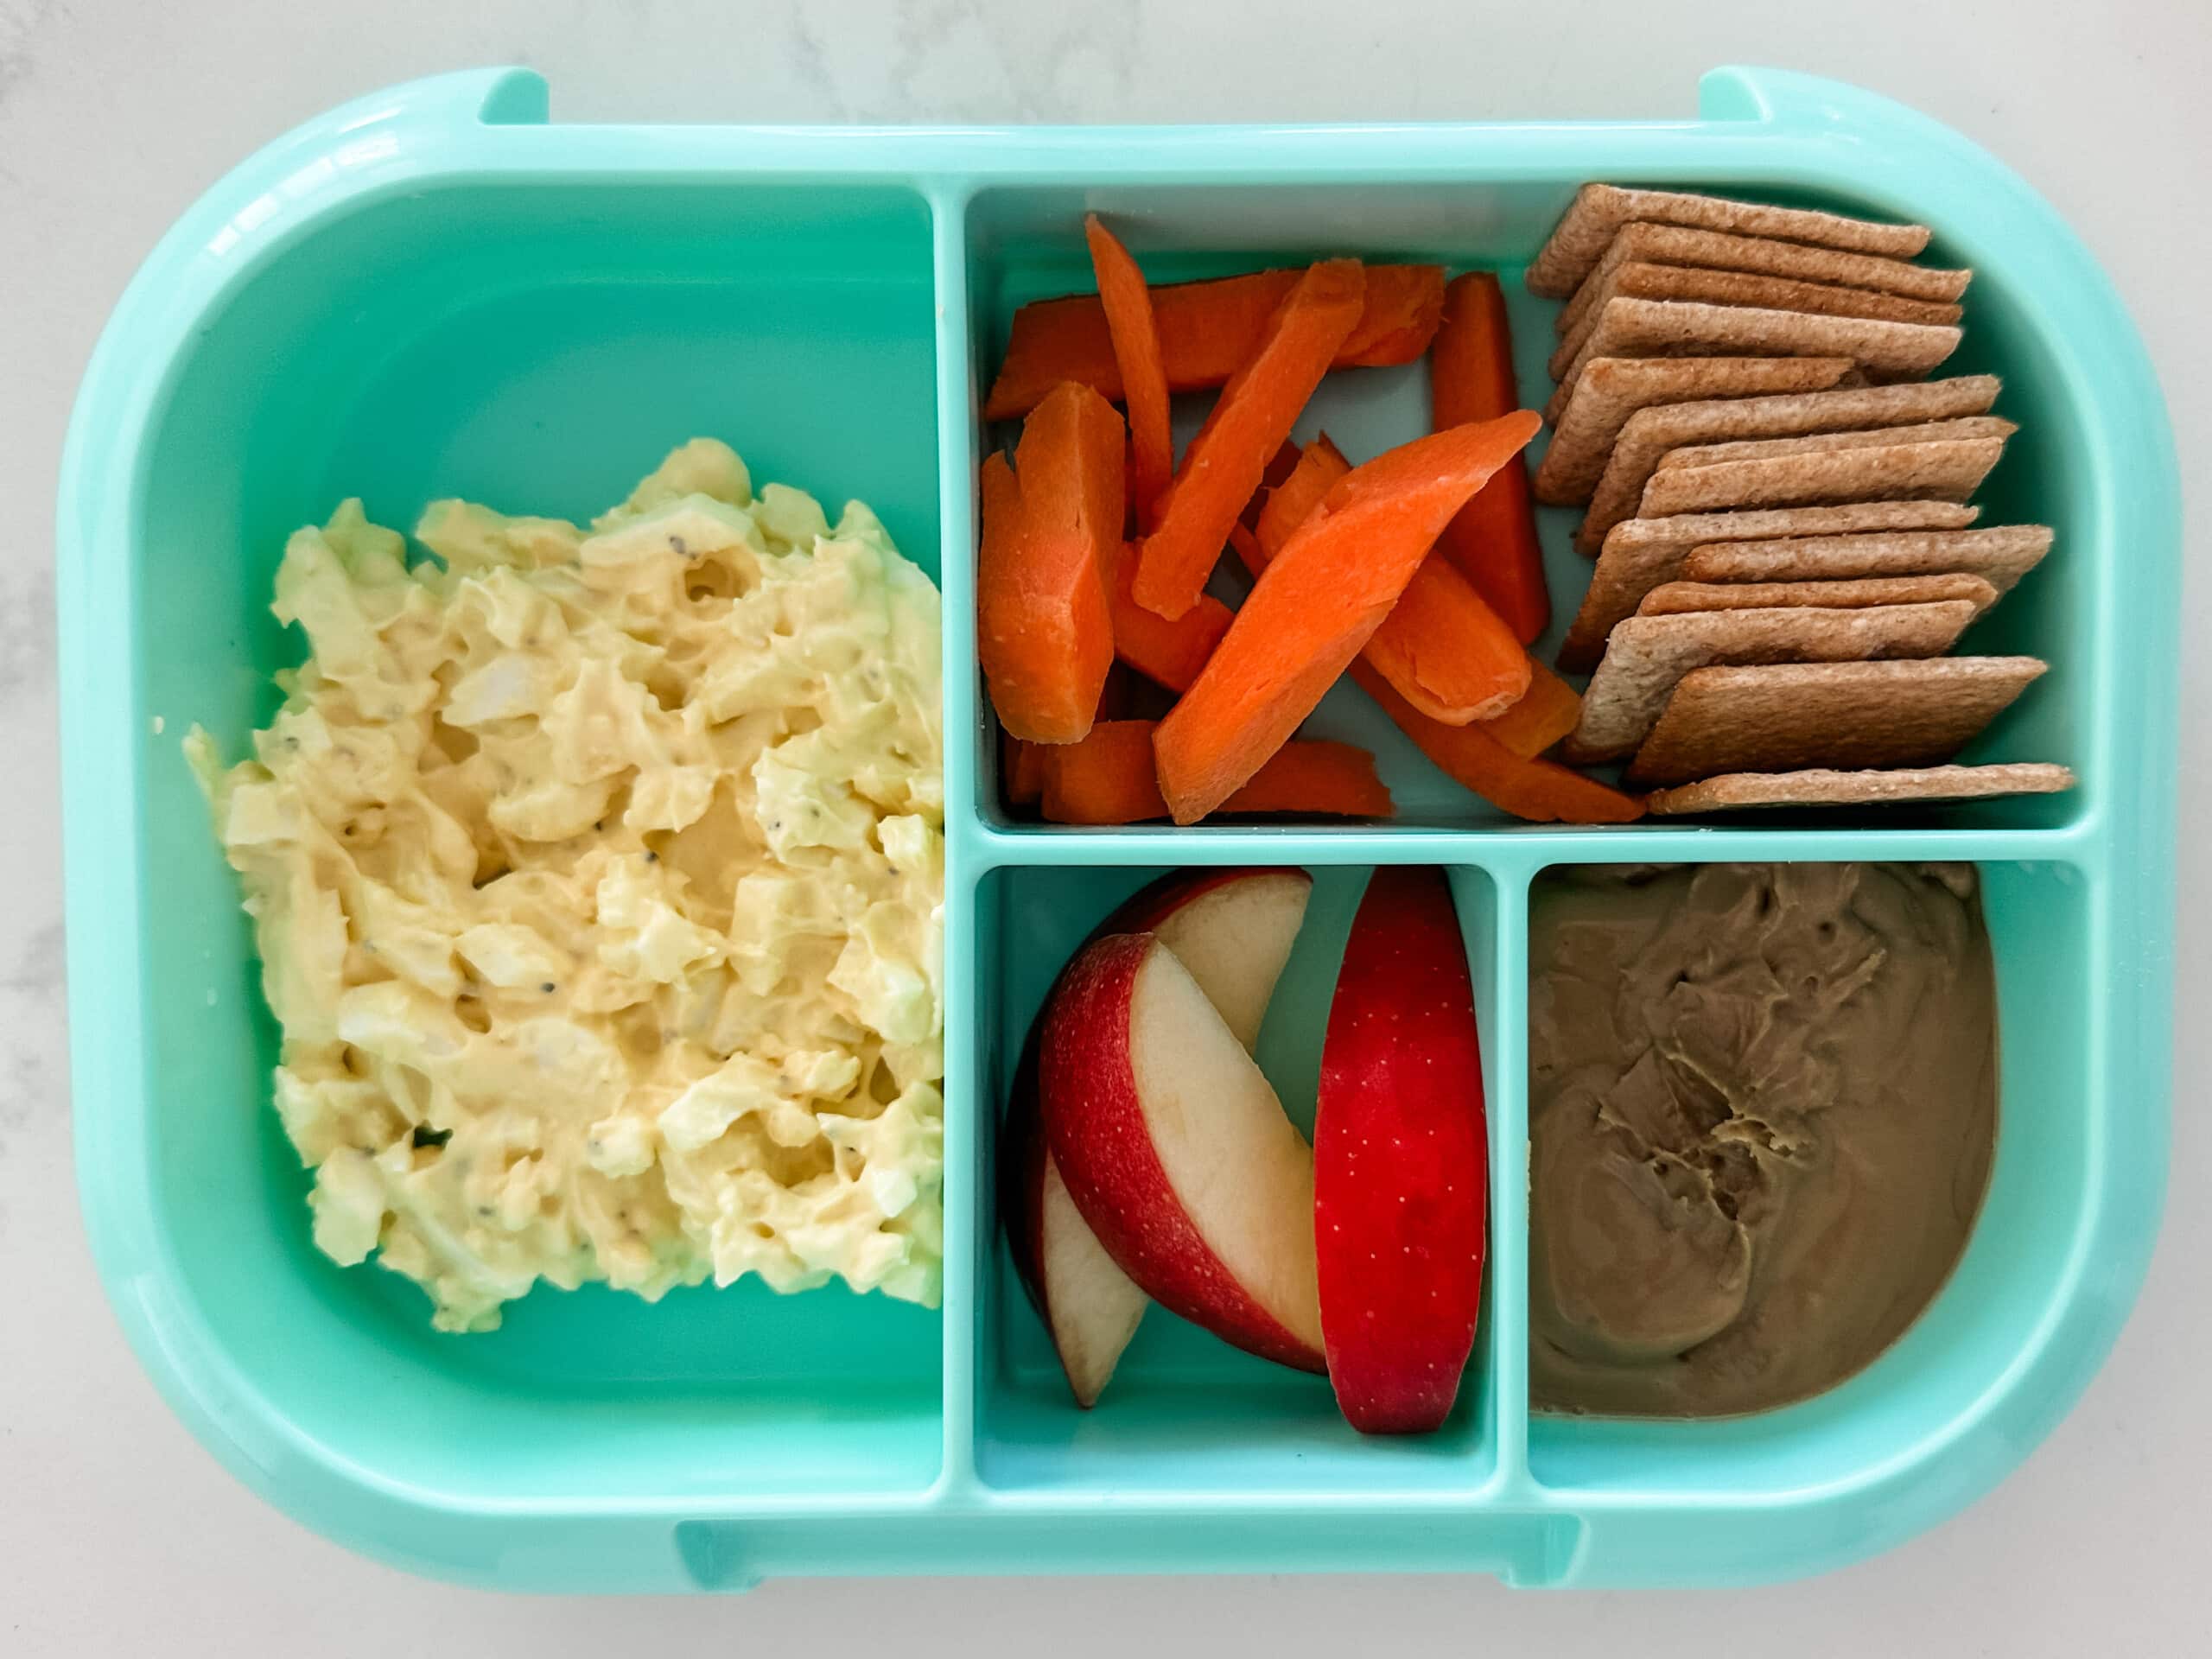 Mint green bento box for kids filled with egg salad, carrots, crackers, apple slices, and sun butter